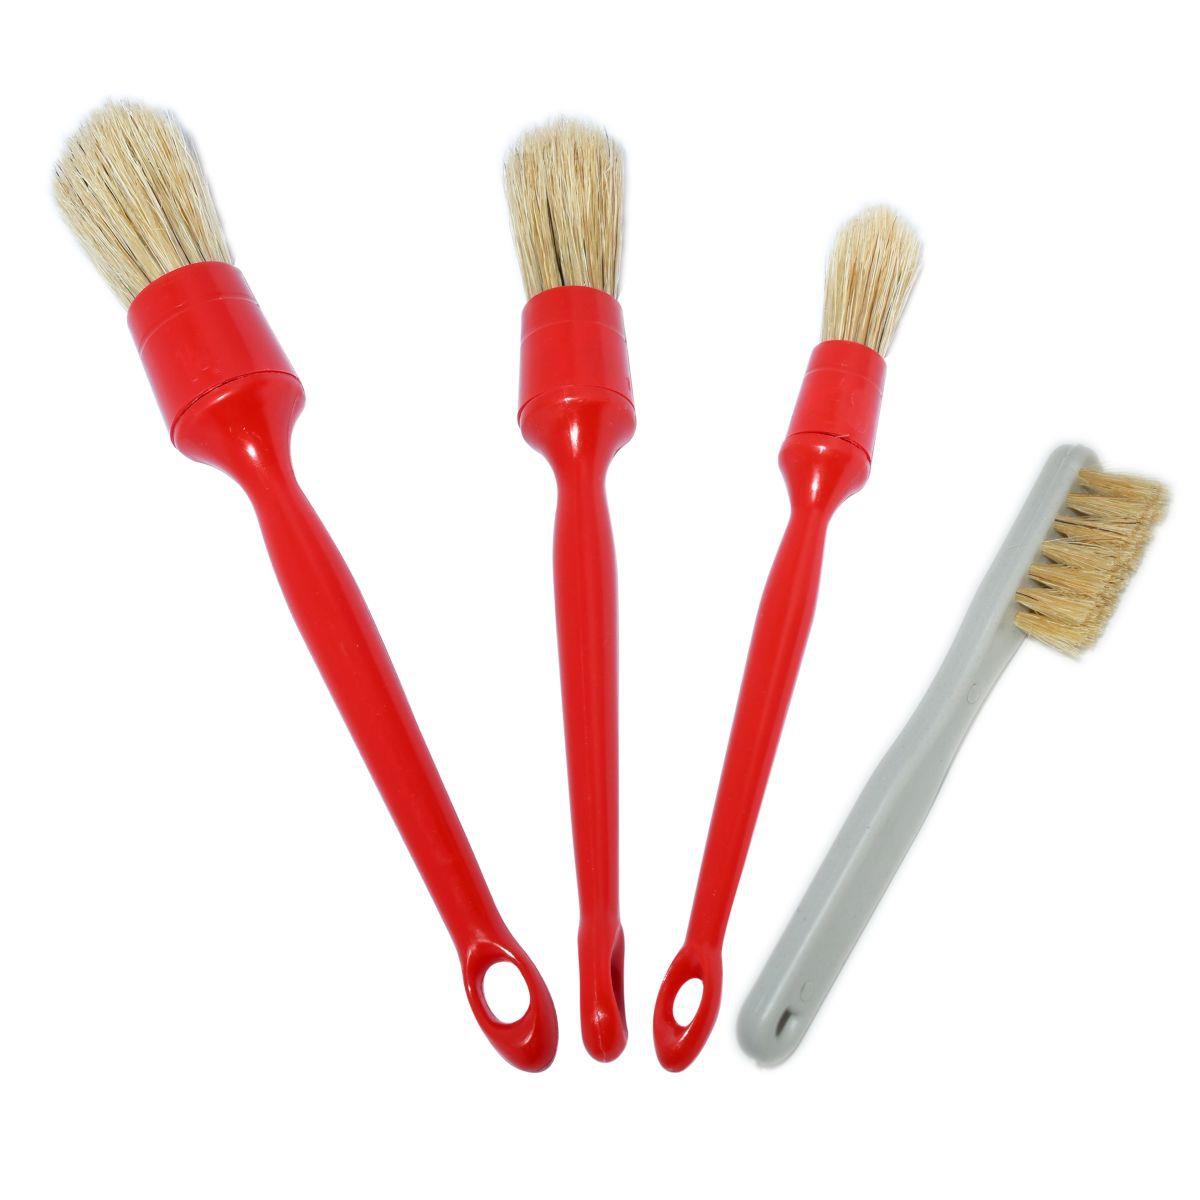 Detailed%20Cleaning%20Brush%20Set%204%20Pieces